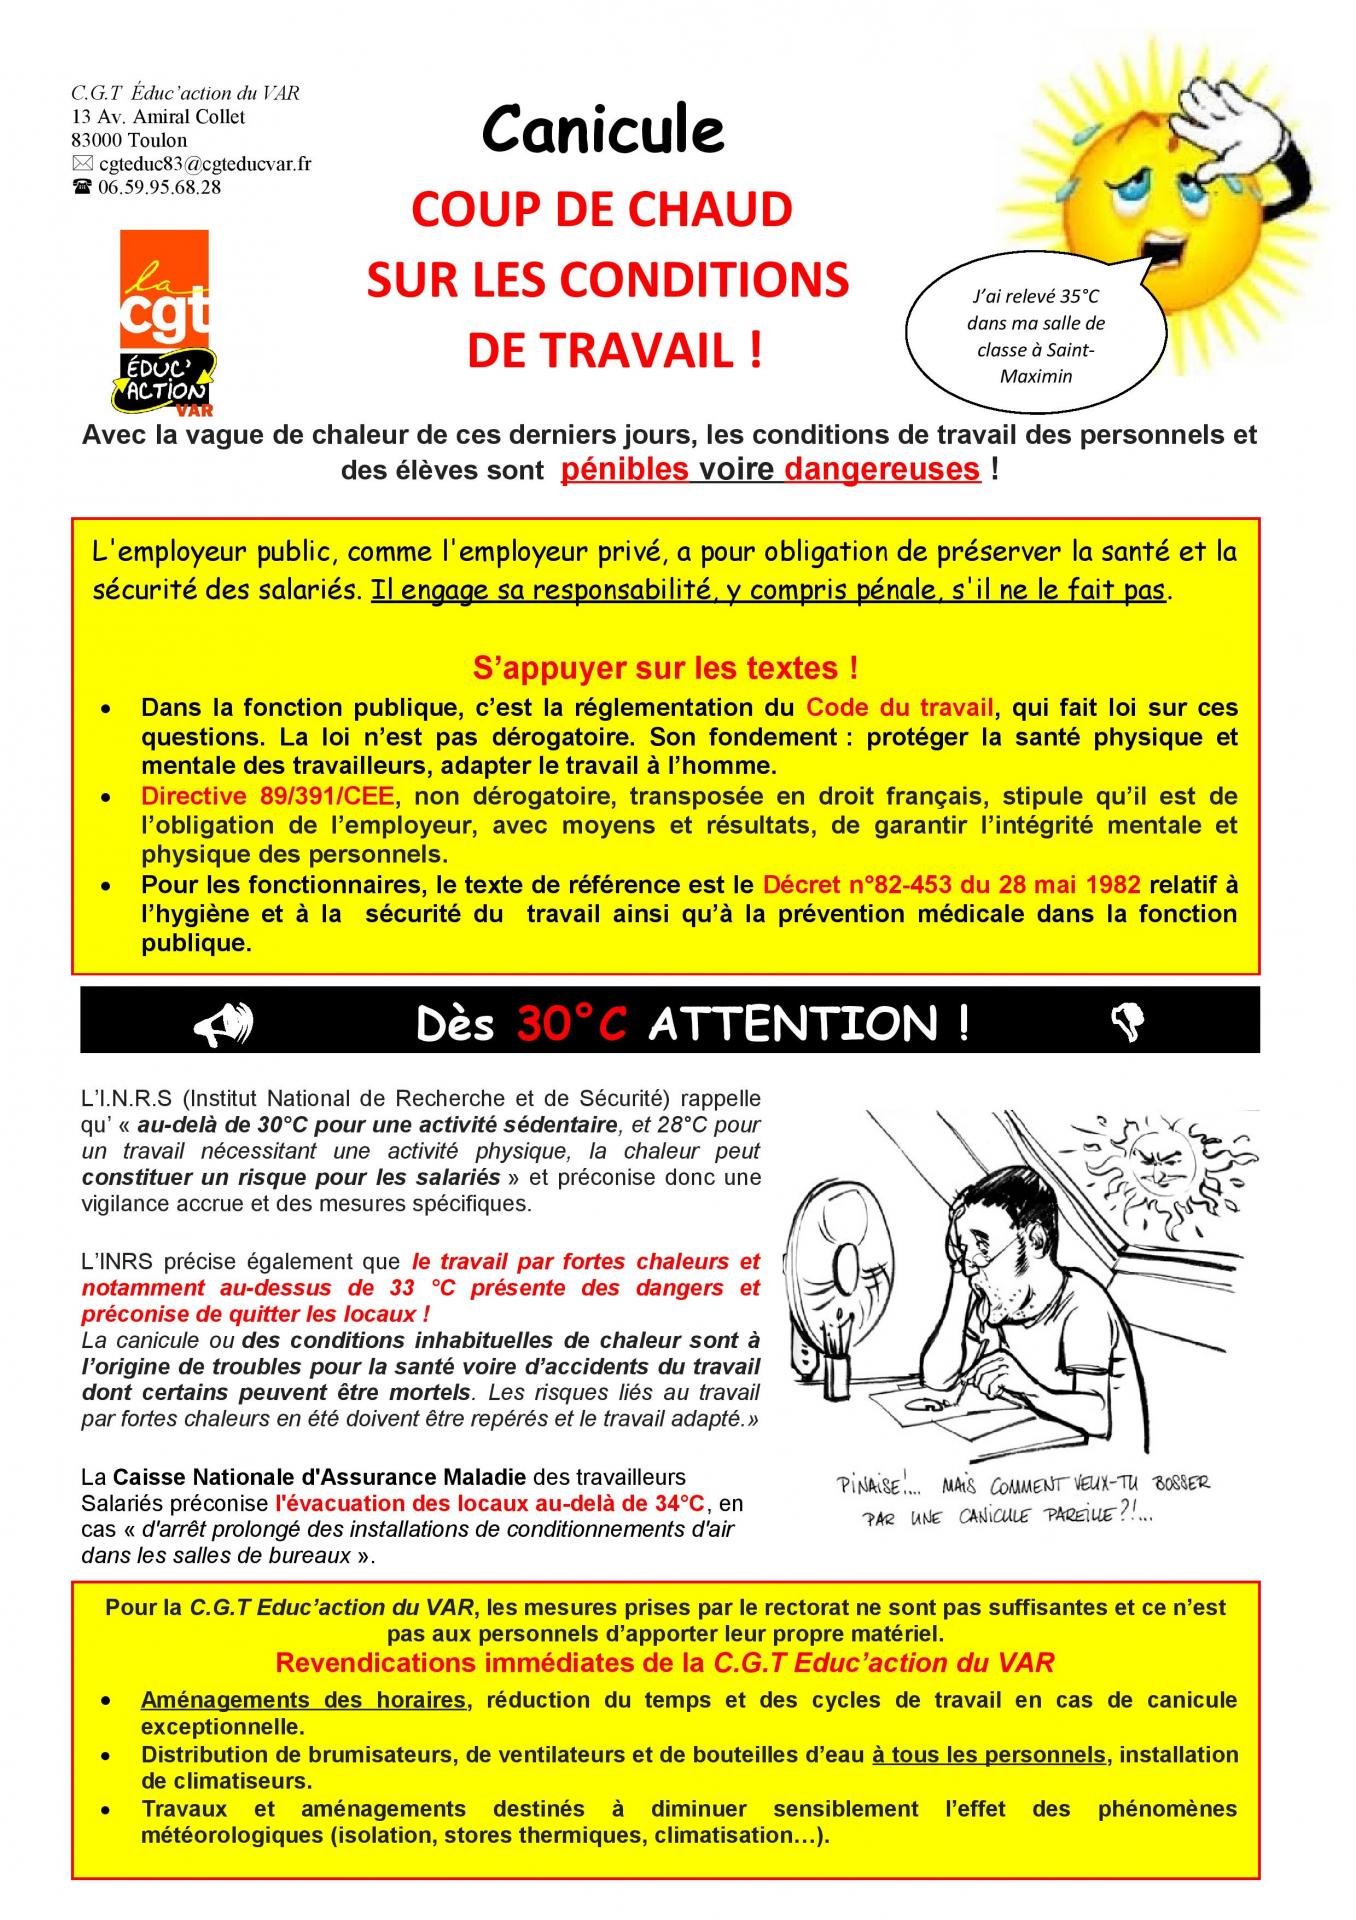 Cgt tract canicule page 001